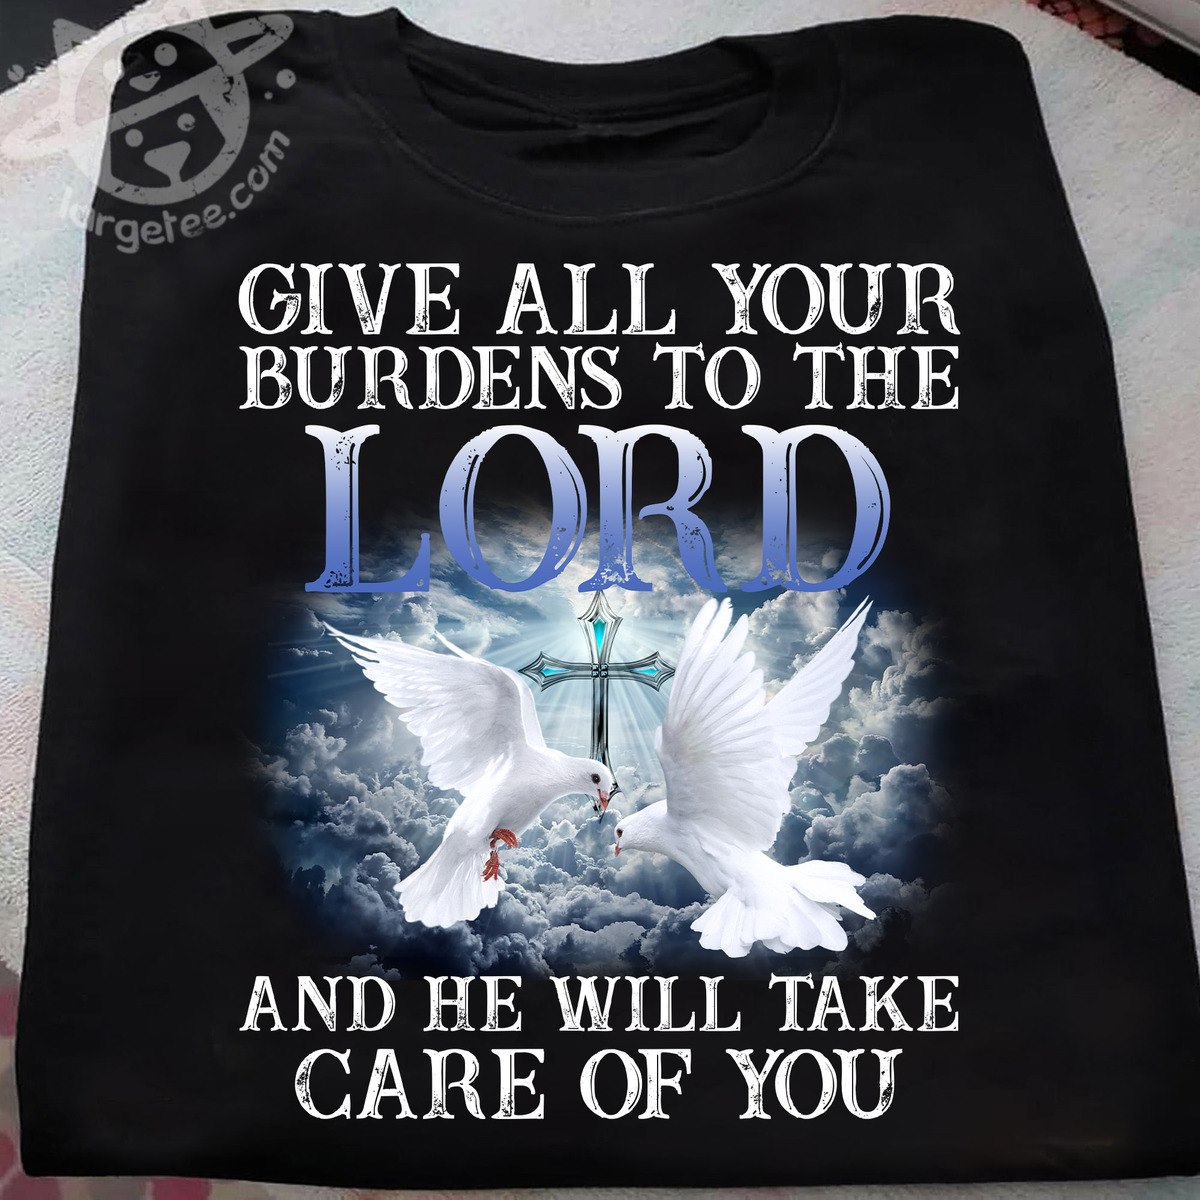 Give all your burdens to the lord and he will take care of you - Pigeons and god